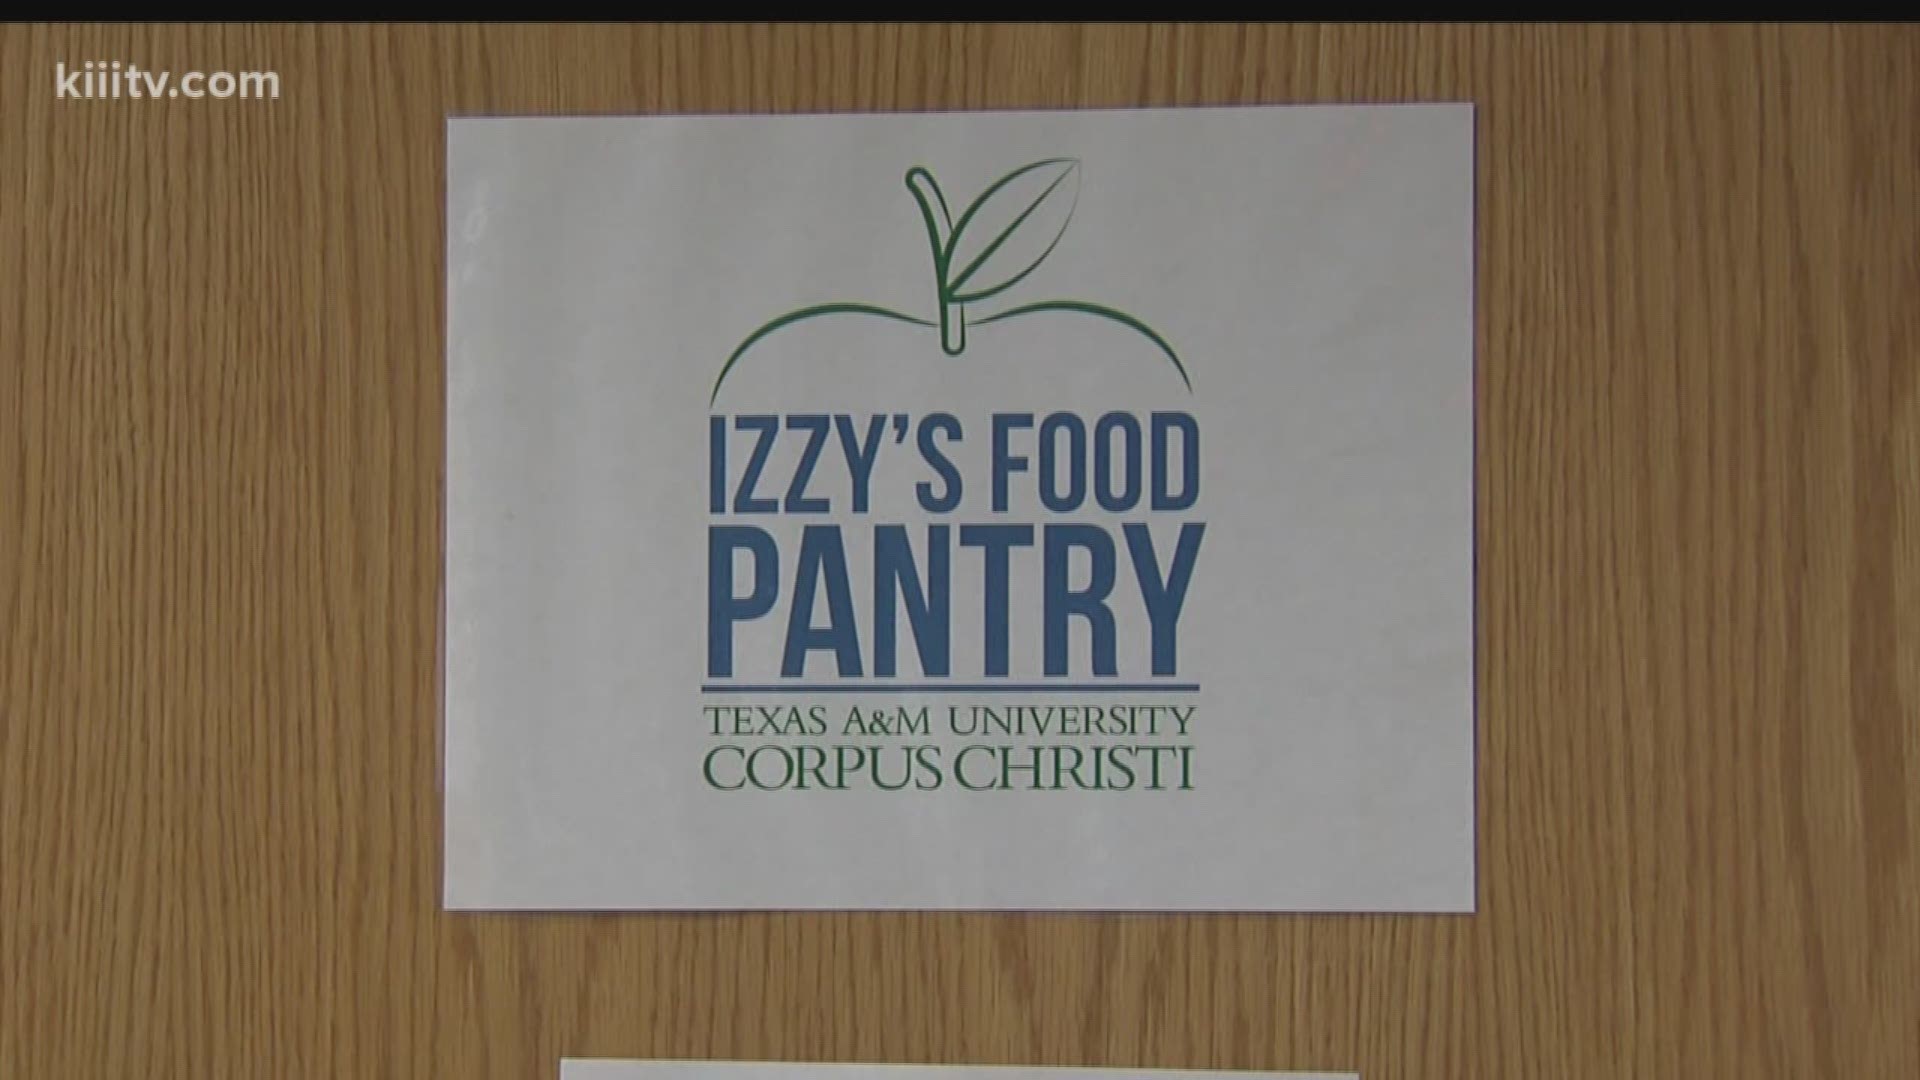 Izzy's Food Pantry is a place where students at Texas A&m University-Corpus Christi can go if they need some help paying for groceries, but currently, they are in need of donations